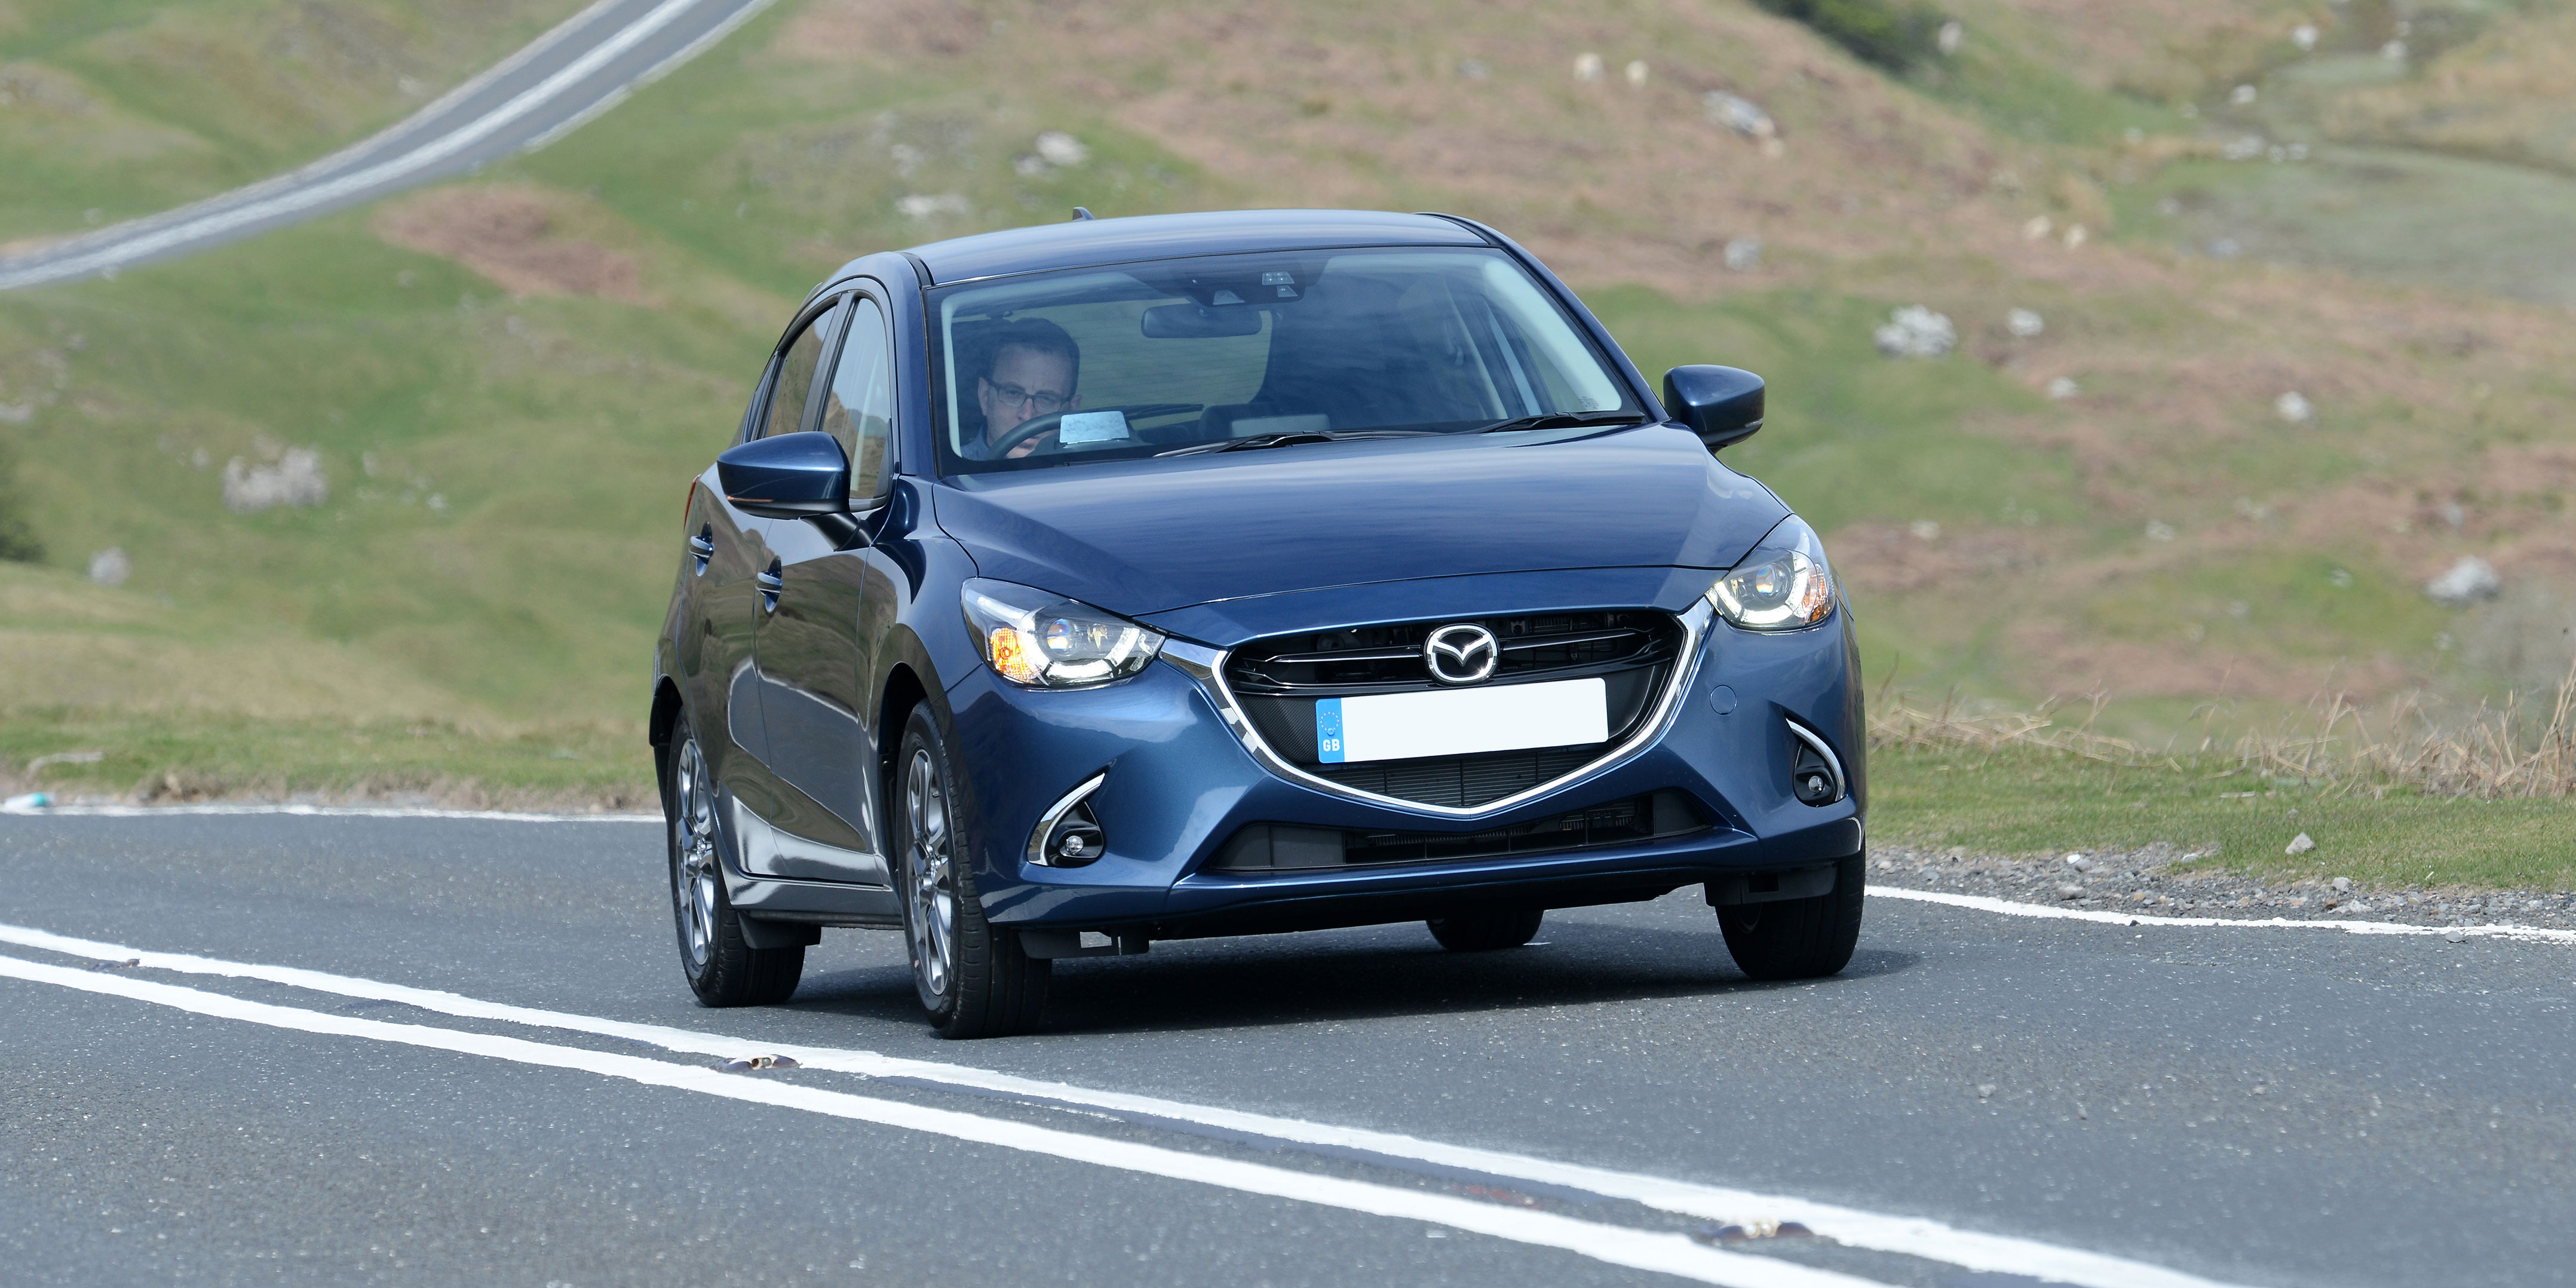 New Mazda 2 Review Carwow